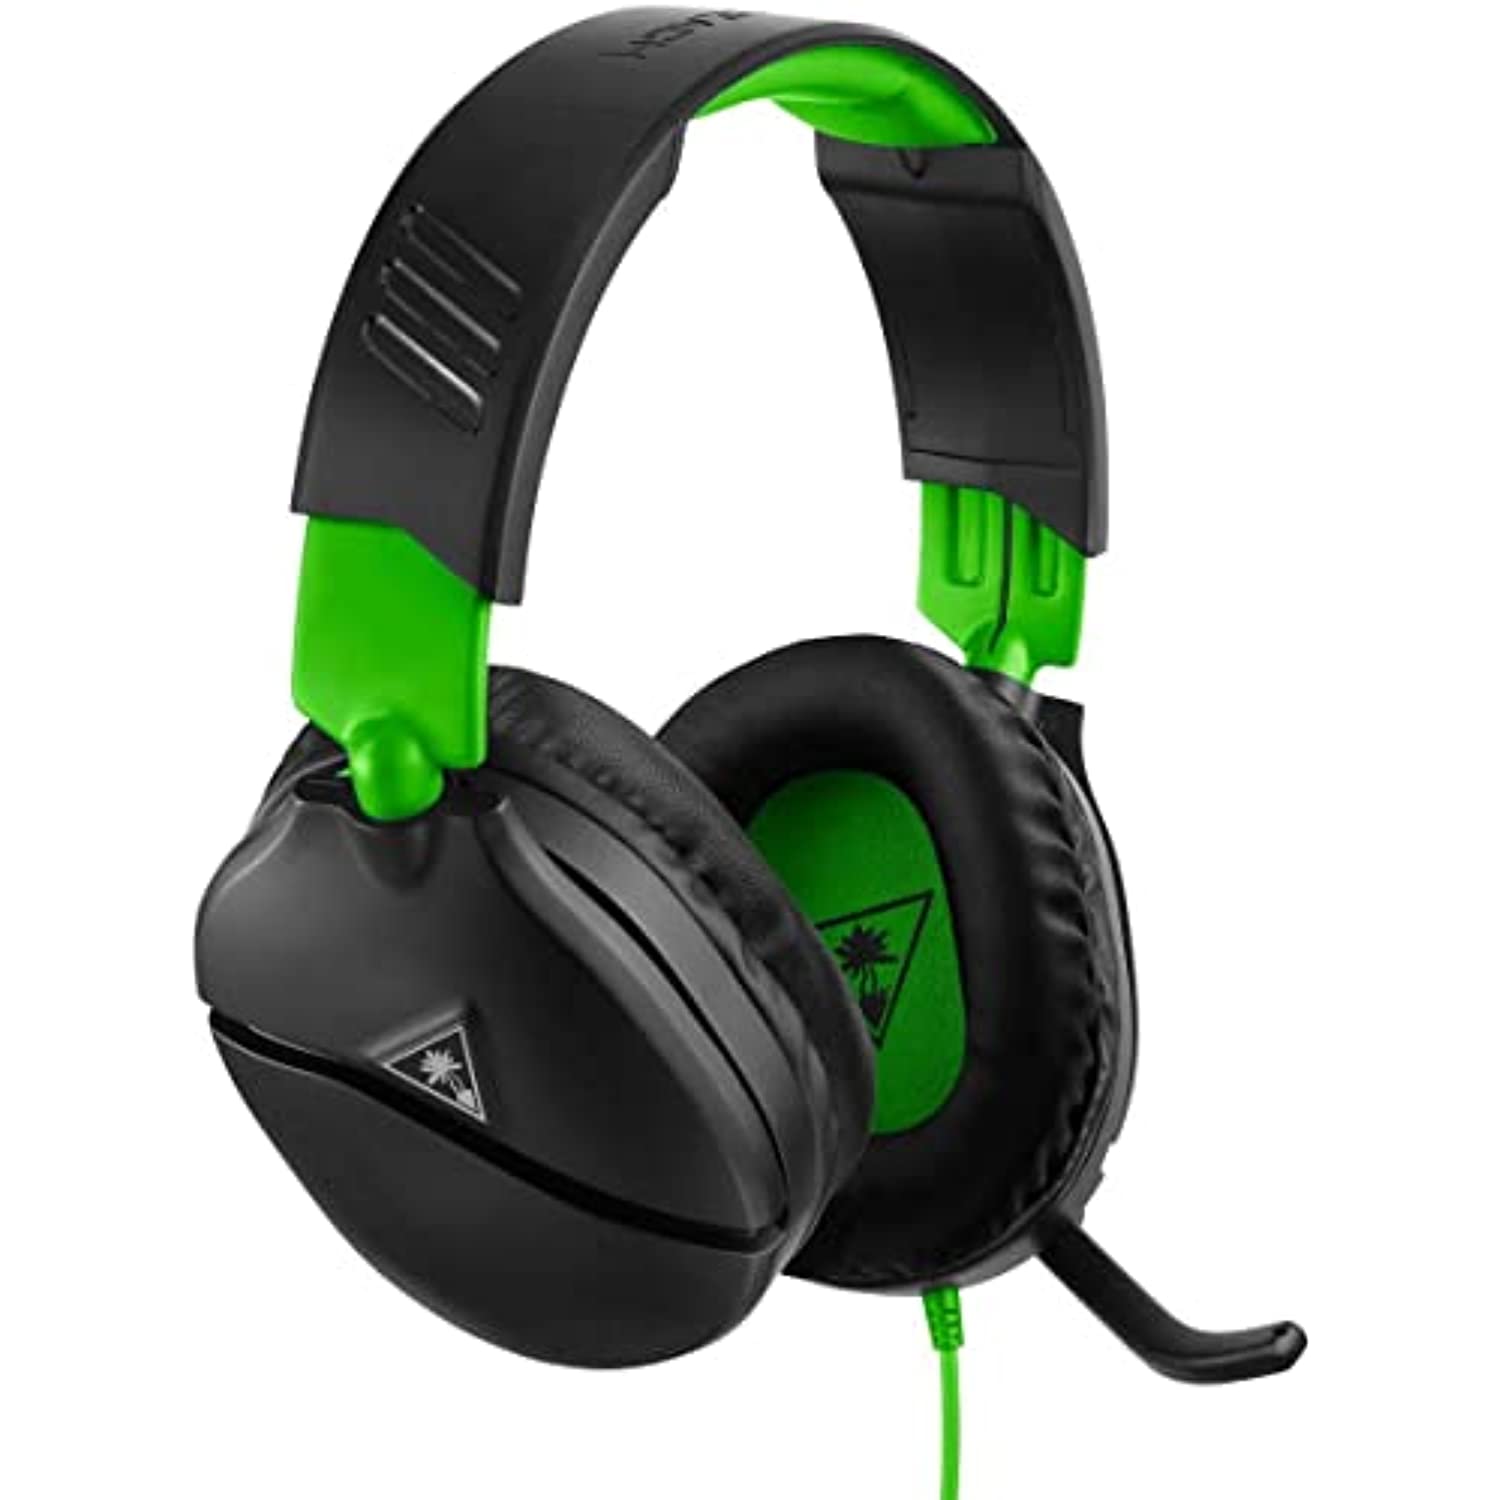 Turtle Beach - TBS-2555-01 Recon 70X Gaming Headset for Xbox Series X|S, Xbox One, PS5, PS4, Nintendo Switch & PC with 3.5mm - Flip-to-Mute Mic, 40mm Speakers - Black